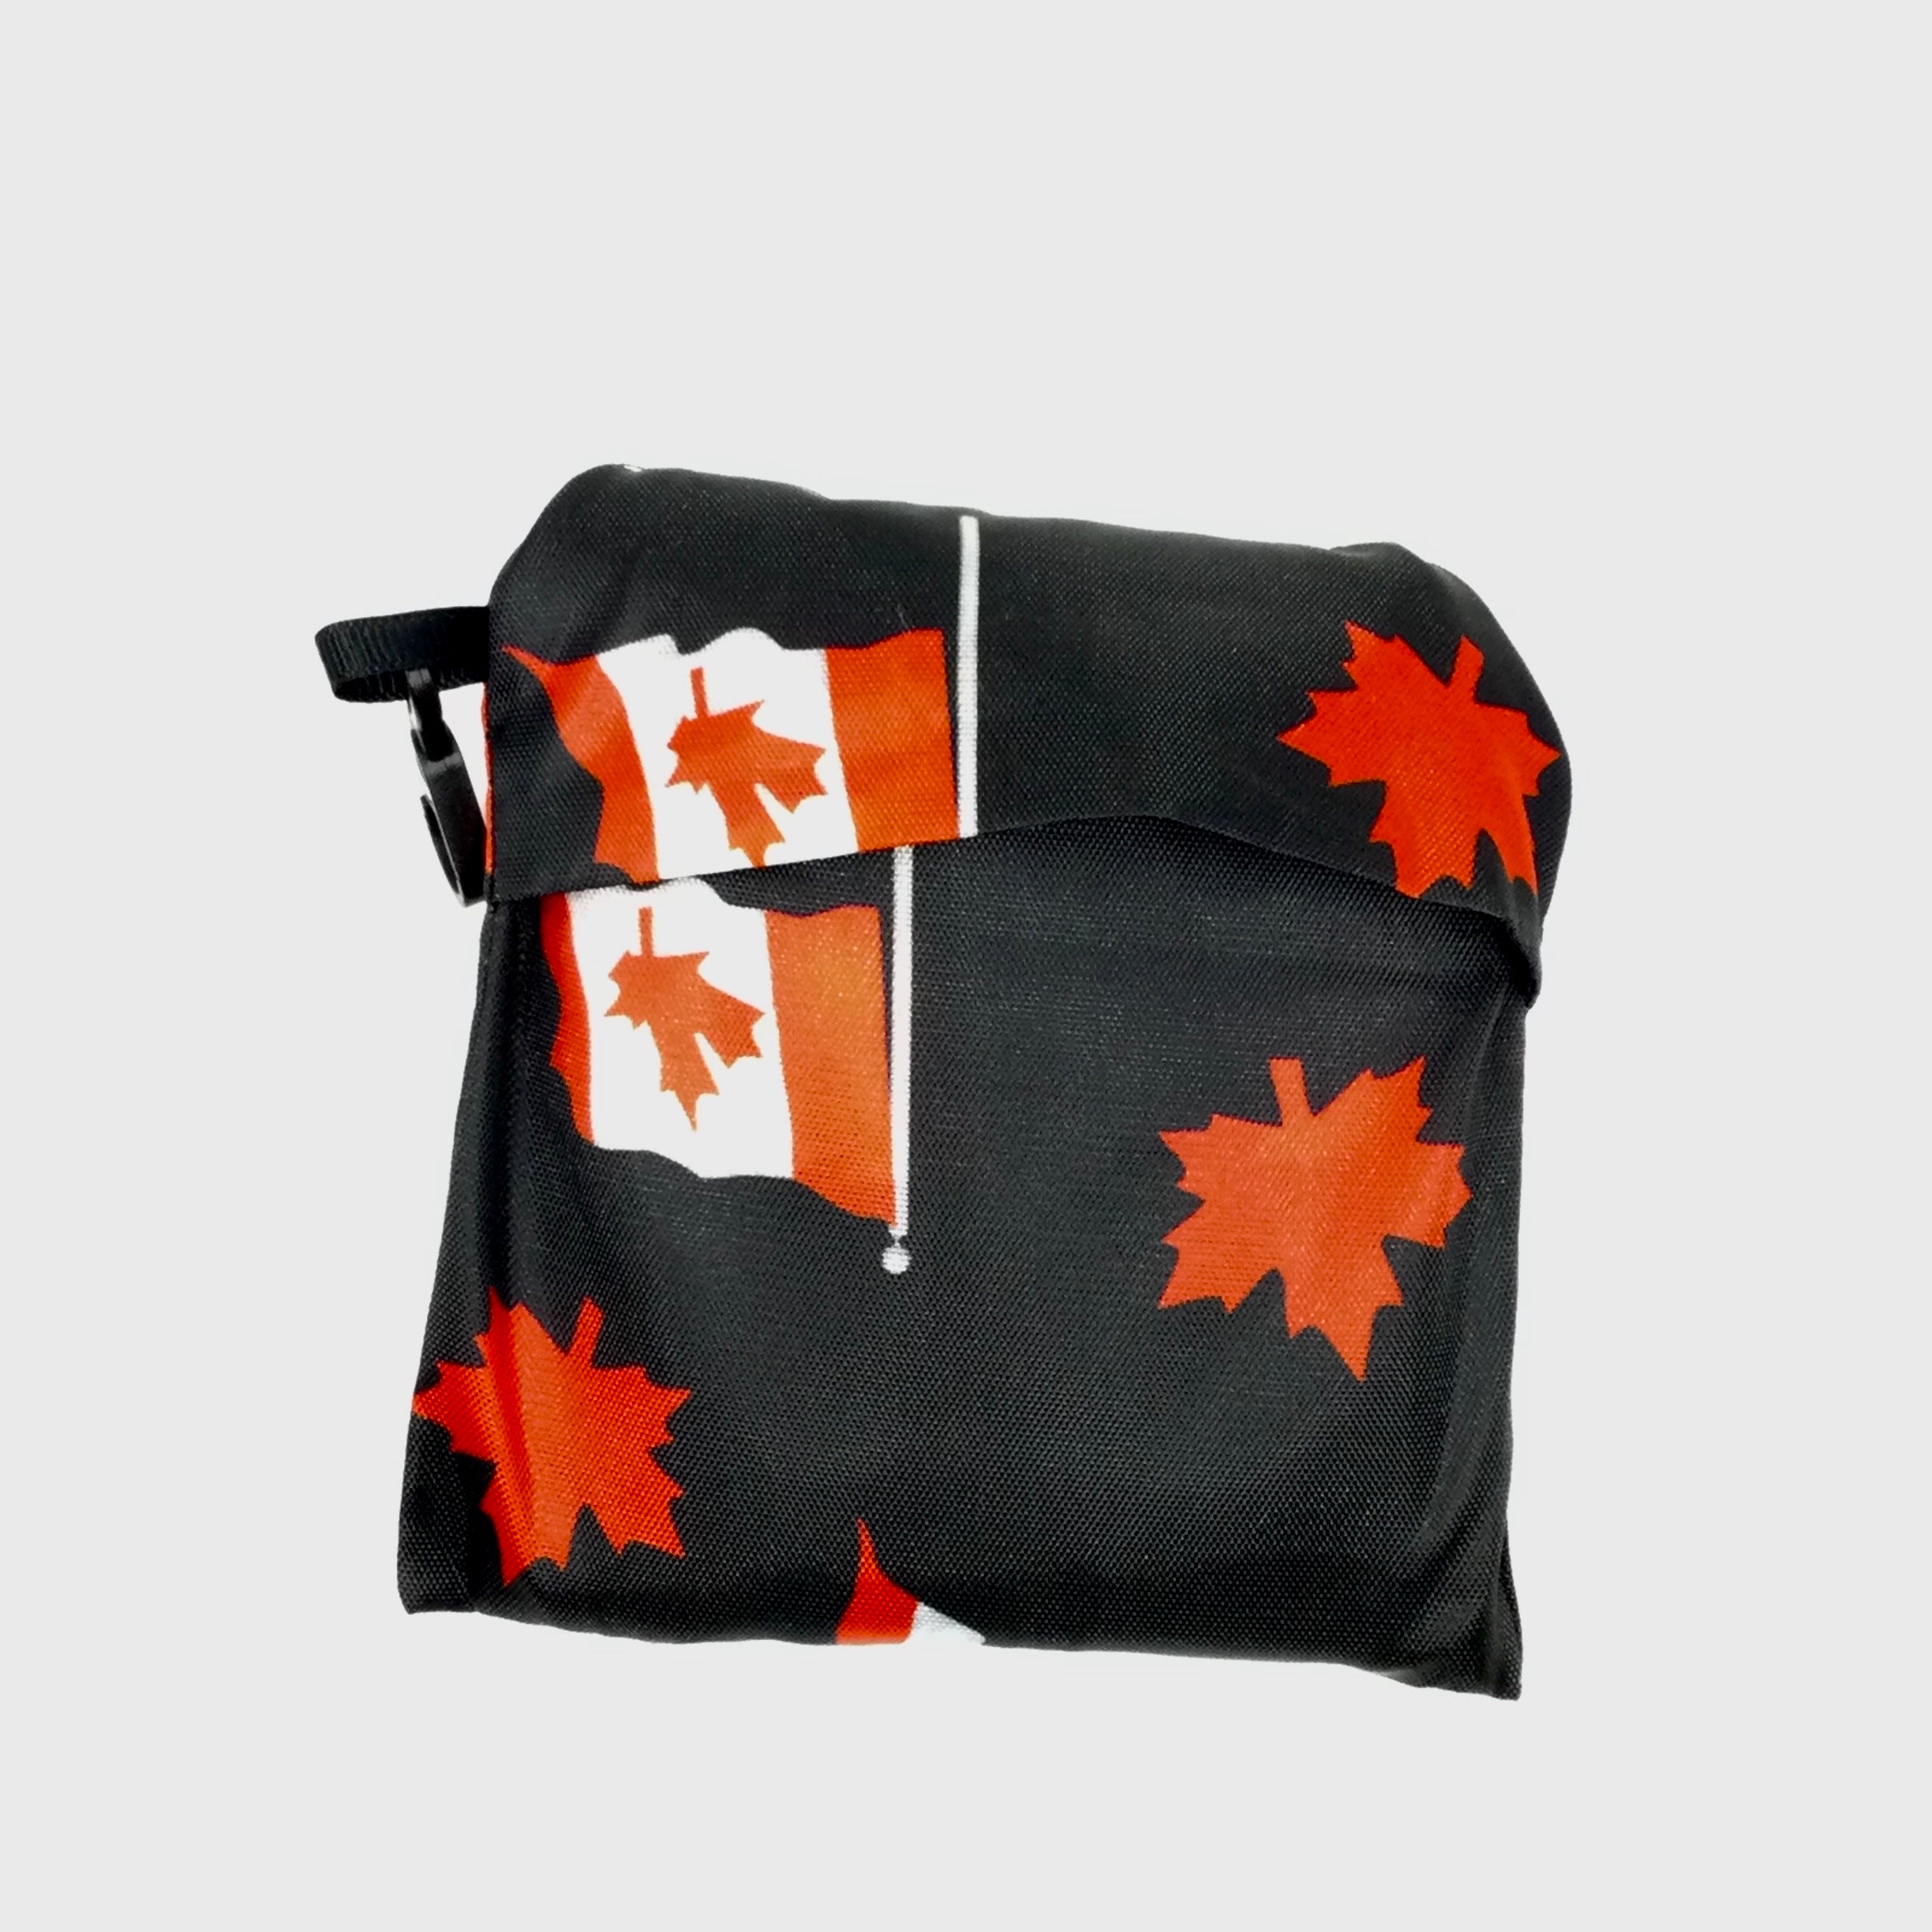 Reusable Shopping Bags - A Gift from Canada